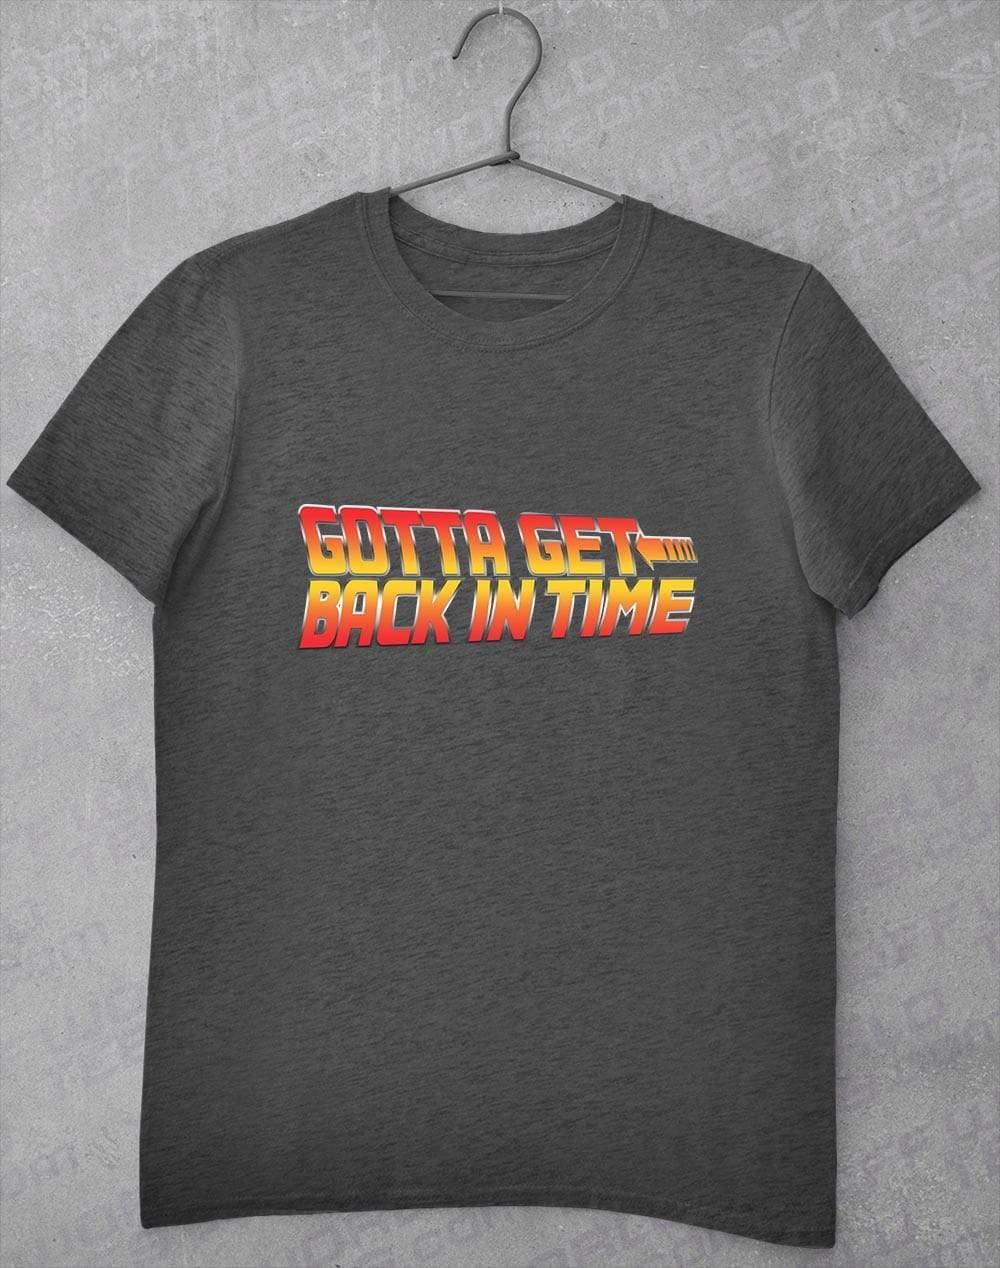 Back in Time T-Shirt S / Dark Heather  - Off World Tees